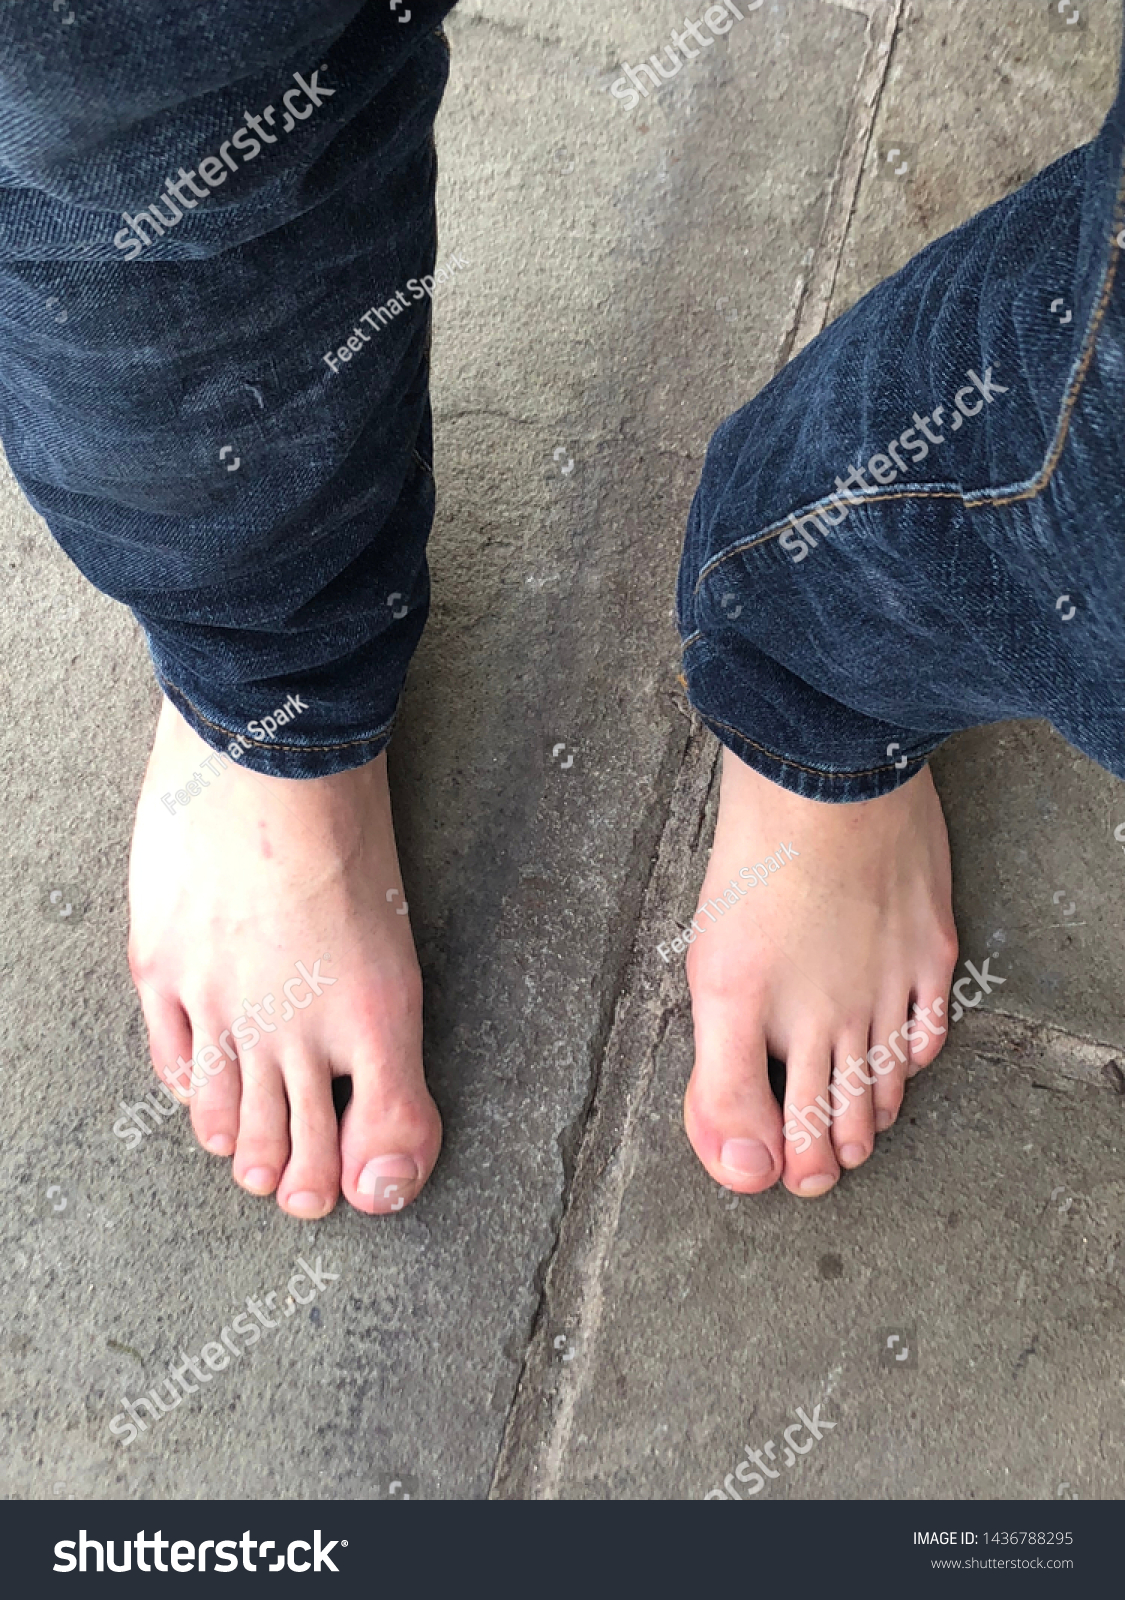 Feet jeans and Wondering What